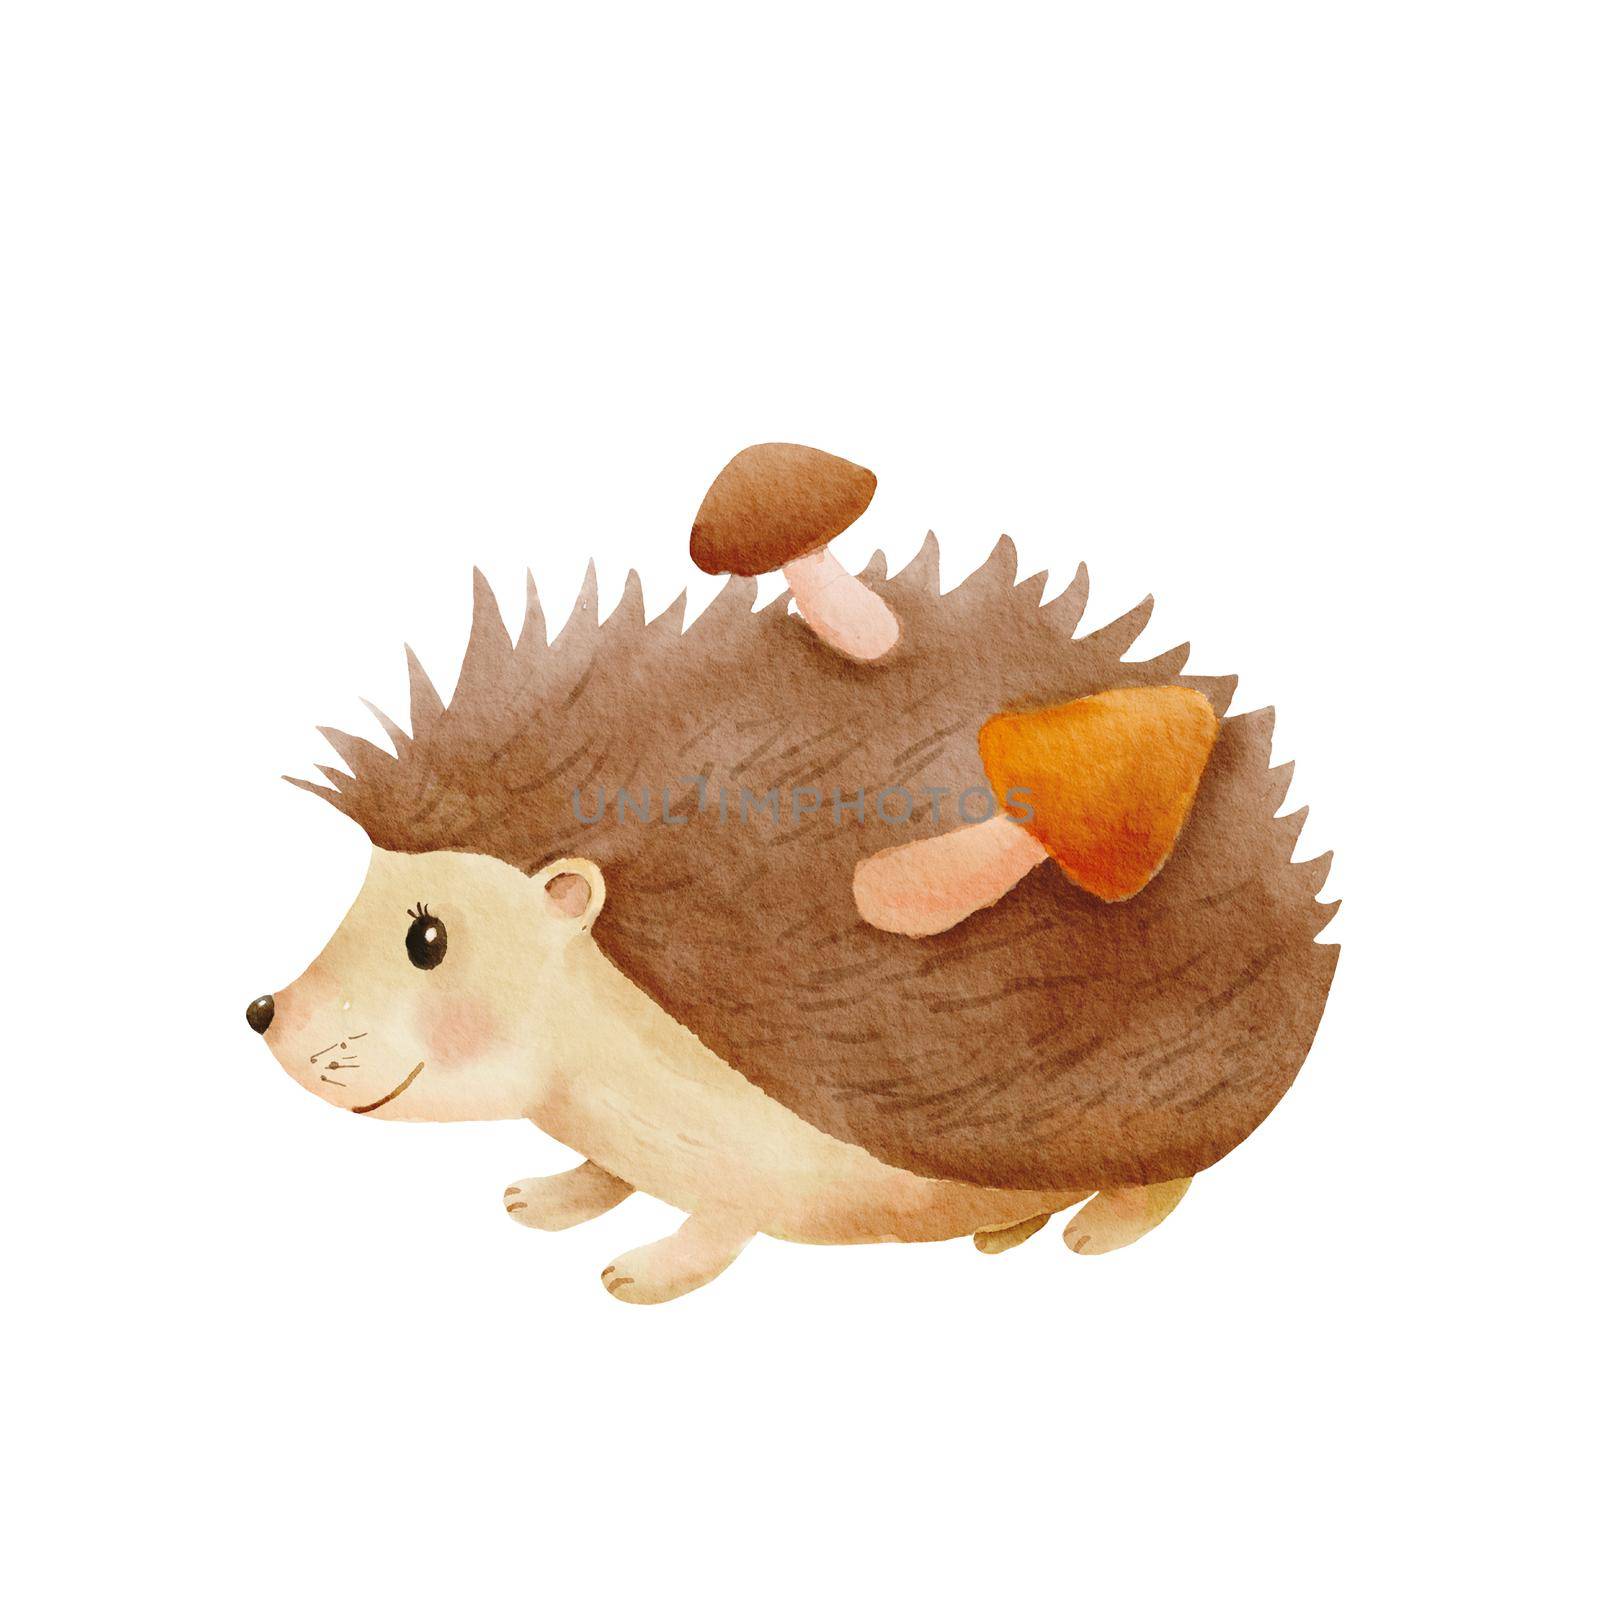 Watercolor cute hedgehog with mushrooms. Hand drawn character forest animal isolated on white. Woodland fall illustration